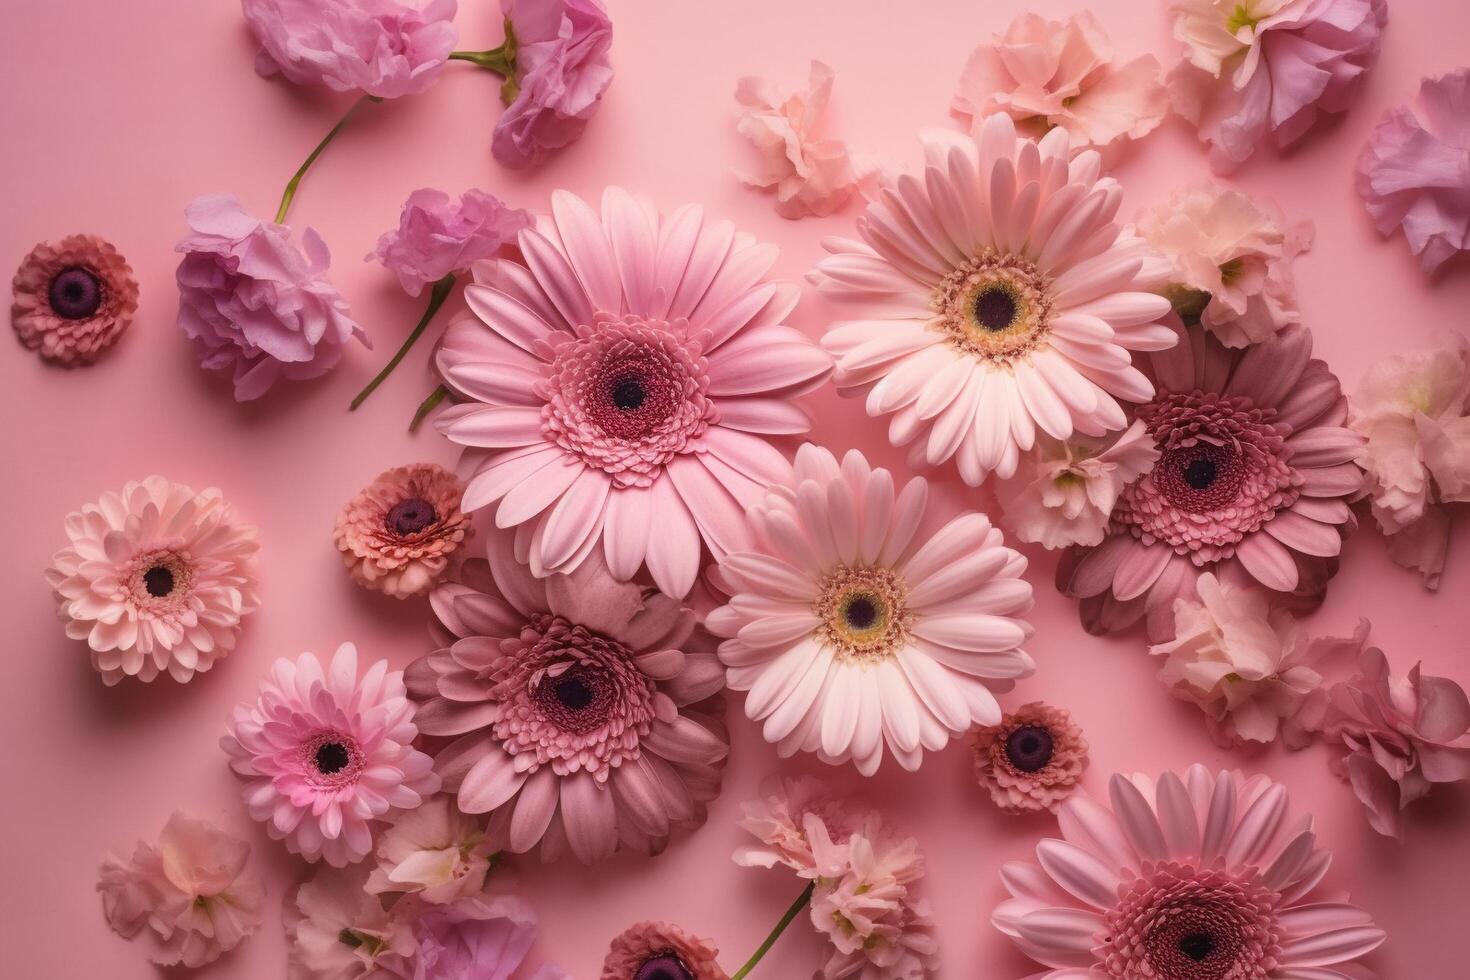 Top view image of pink flowers composition over pastel background, photo